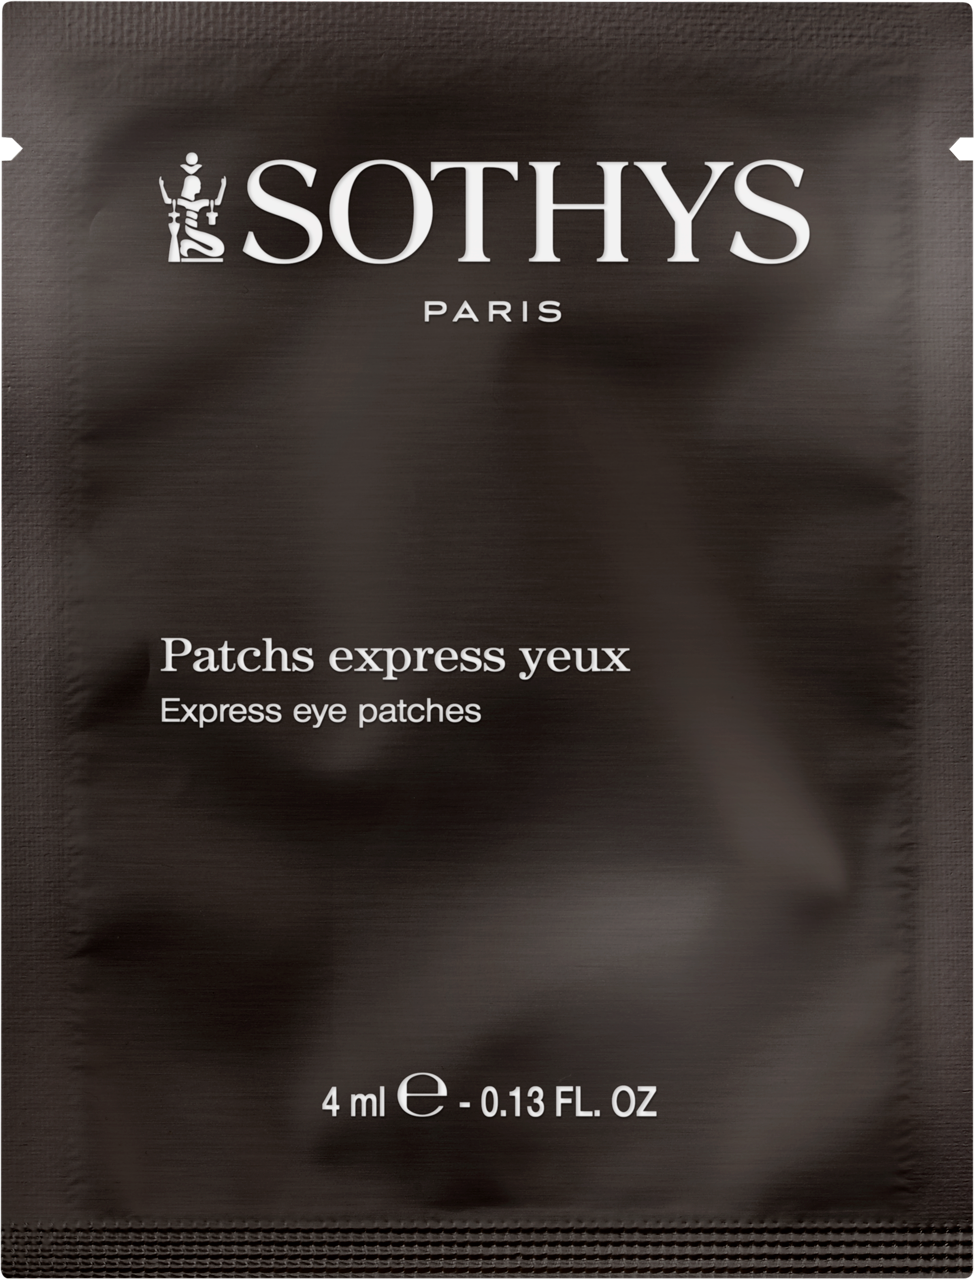 Patchs express yeux